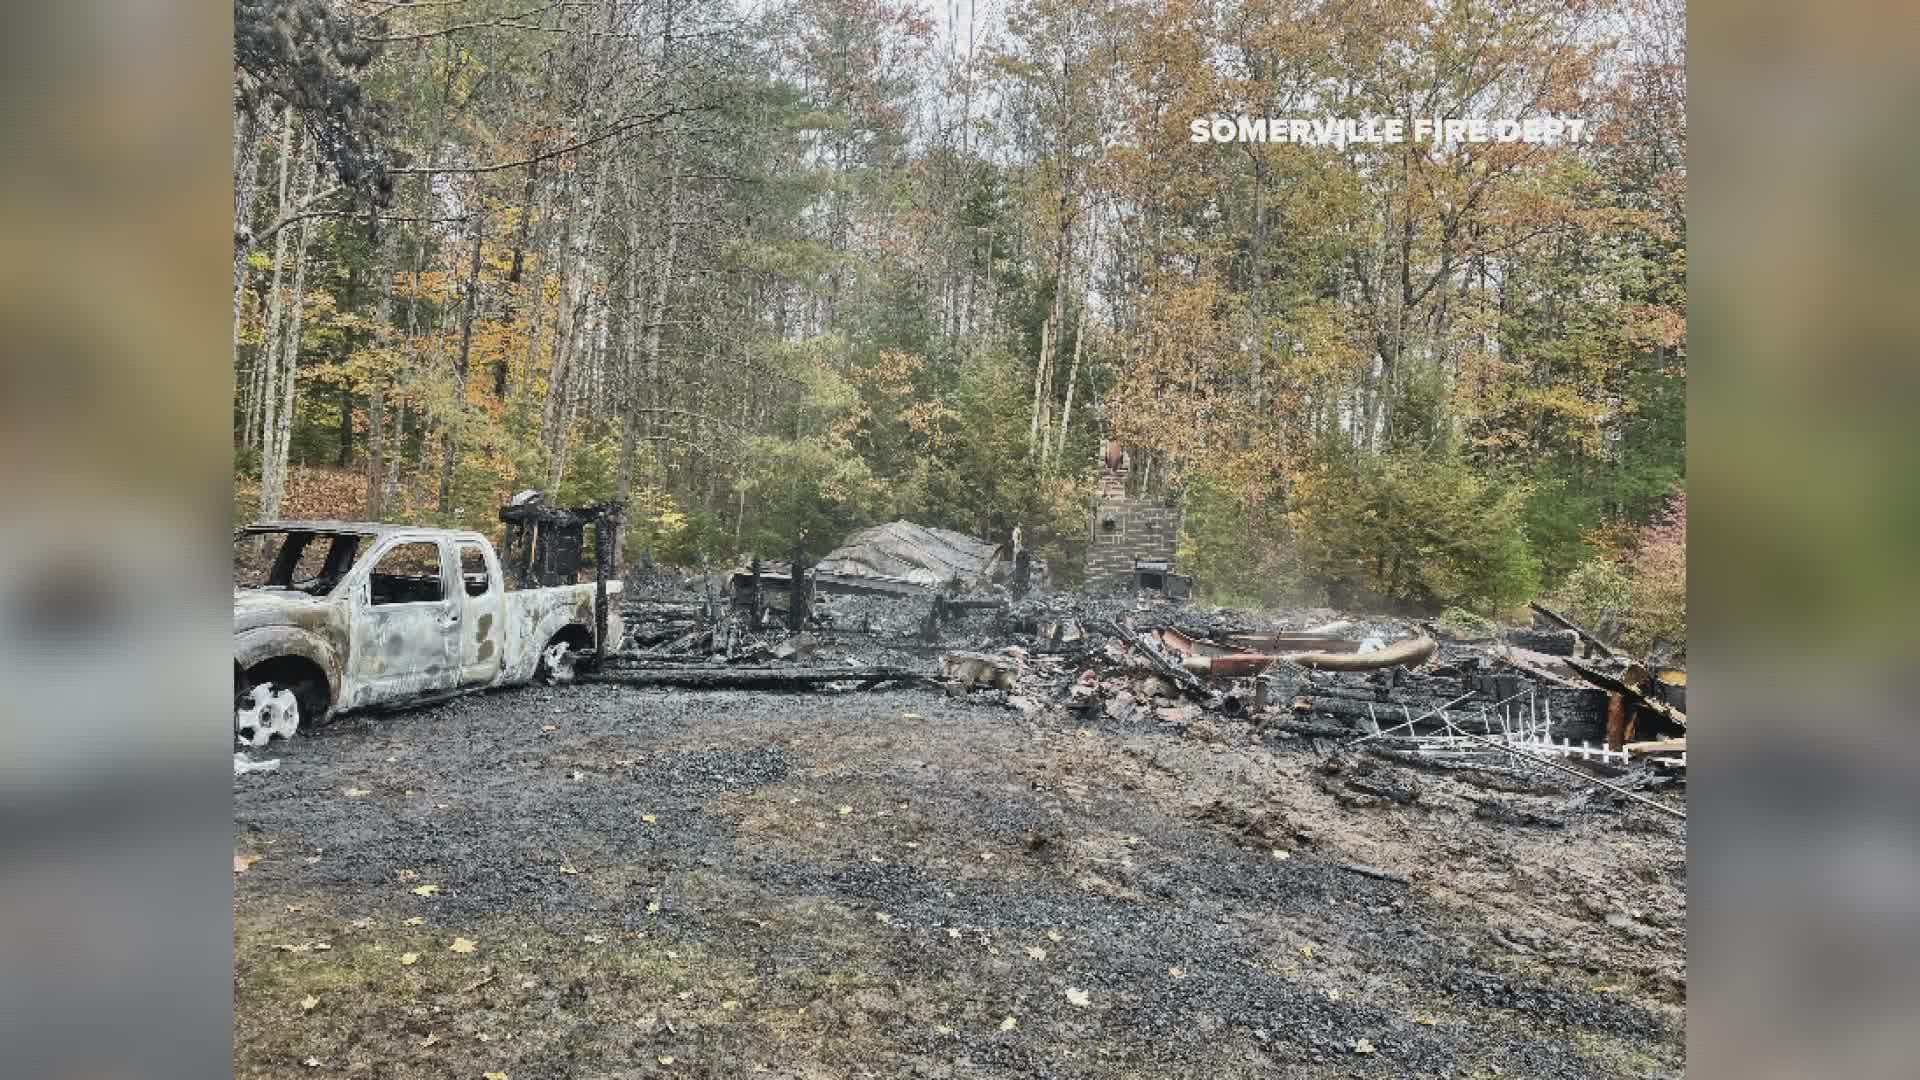 A team of investigators from the fire marshal's office say they were processing the scene from a fire on Crummet Mountain Road when they found human remains